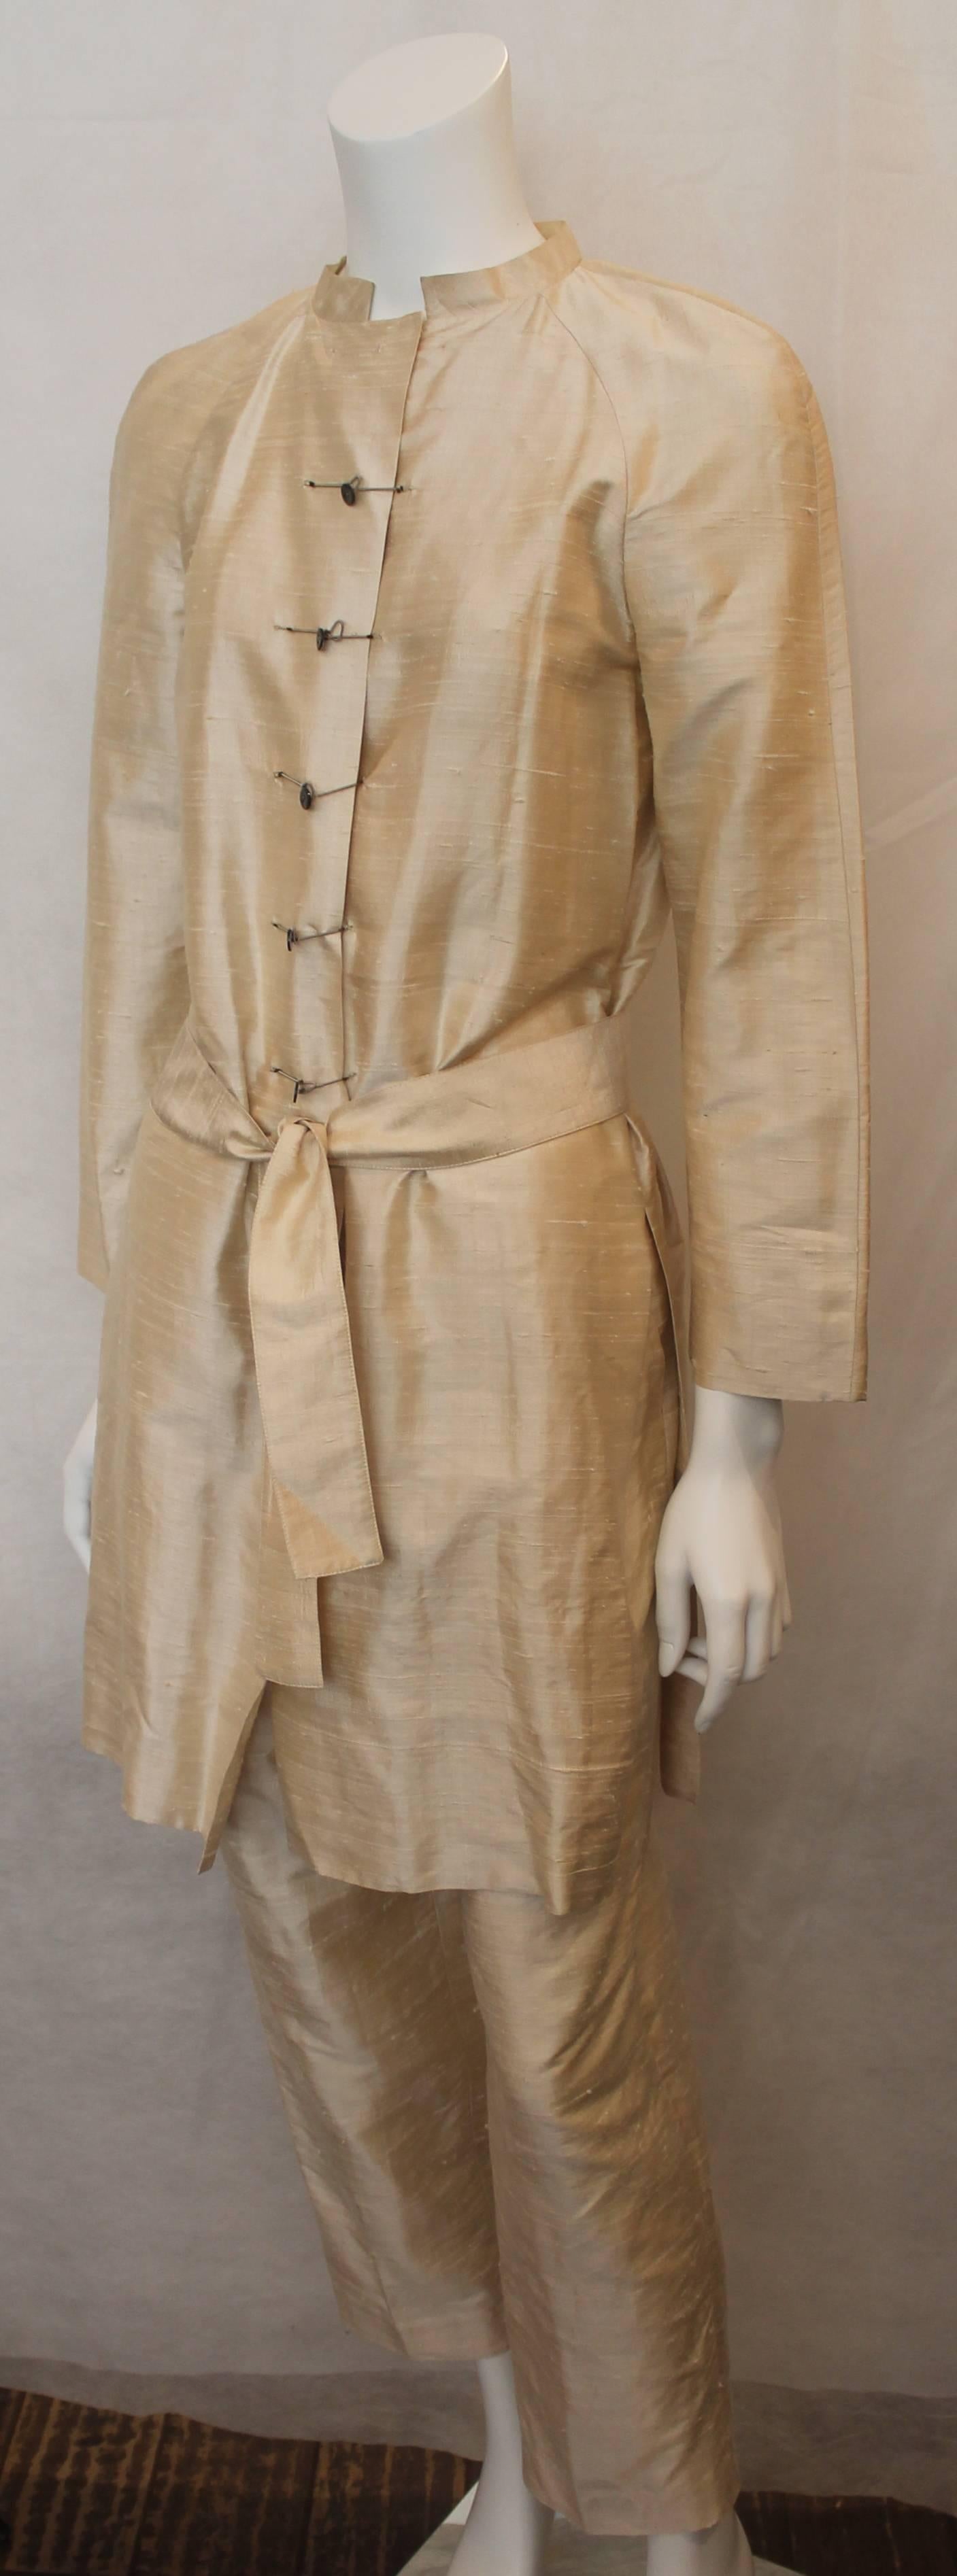 Krizia Ivory Raw Silk Coat & Pant Set with Belt - 42 - 1970's. This set is in very good vintage condition with a couple small stains on the back of the coat and some pulling throughout both pieces. The tunic features an Asian inspired look with